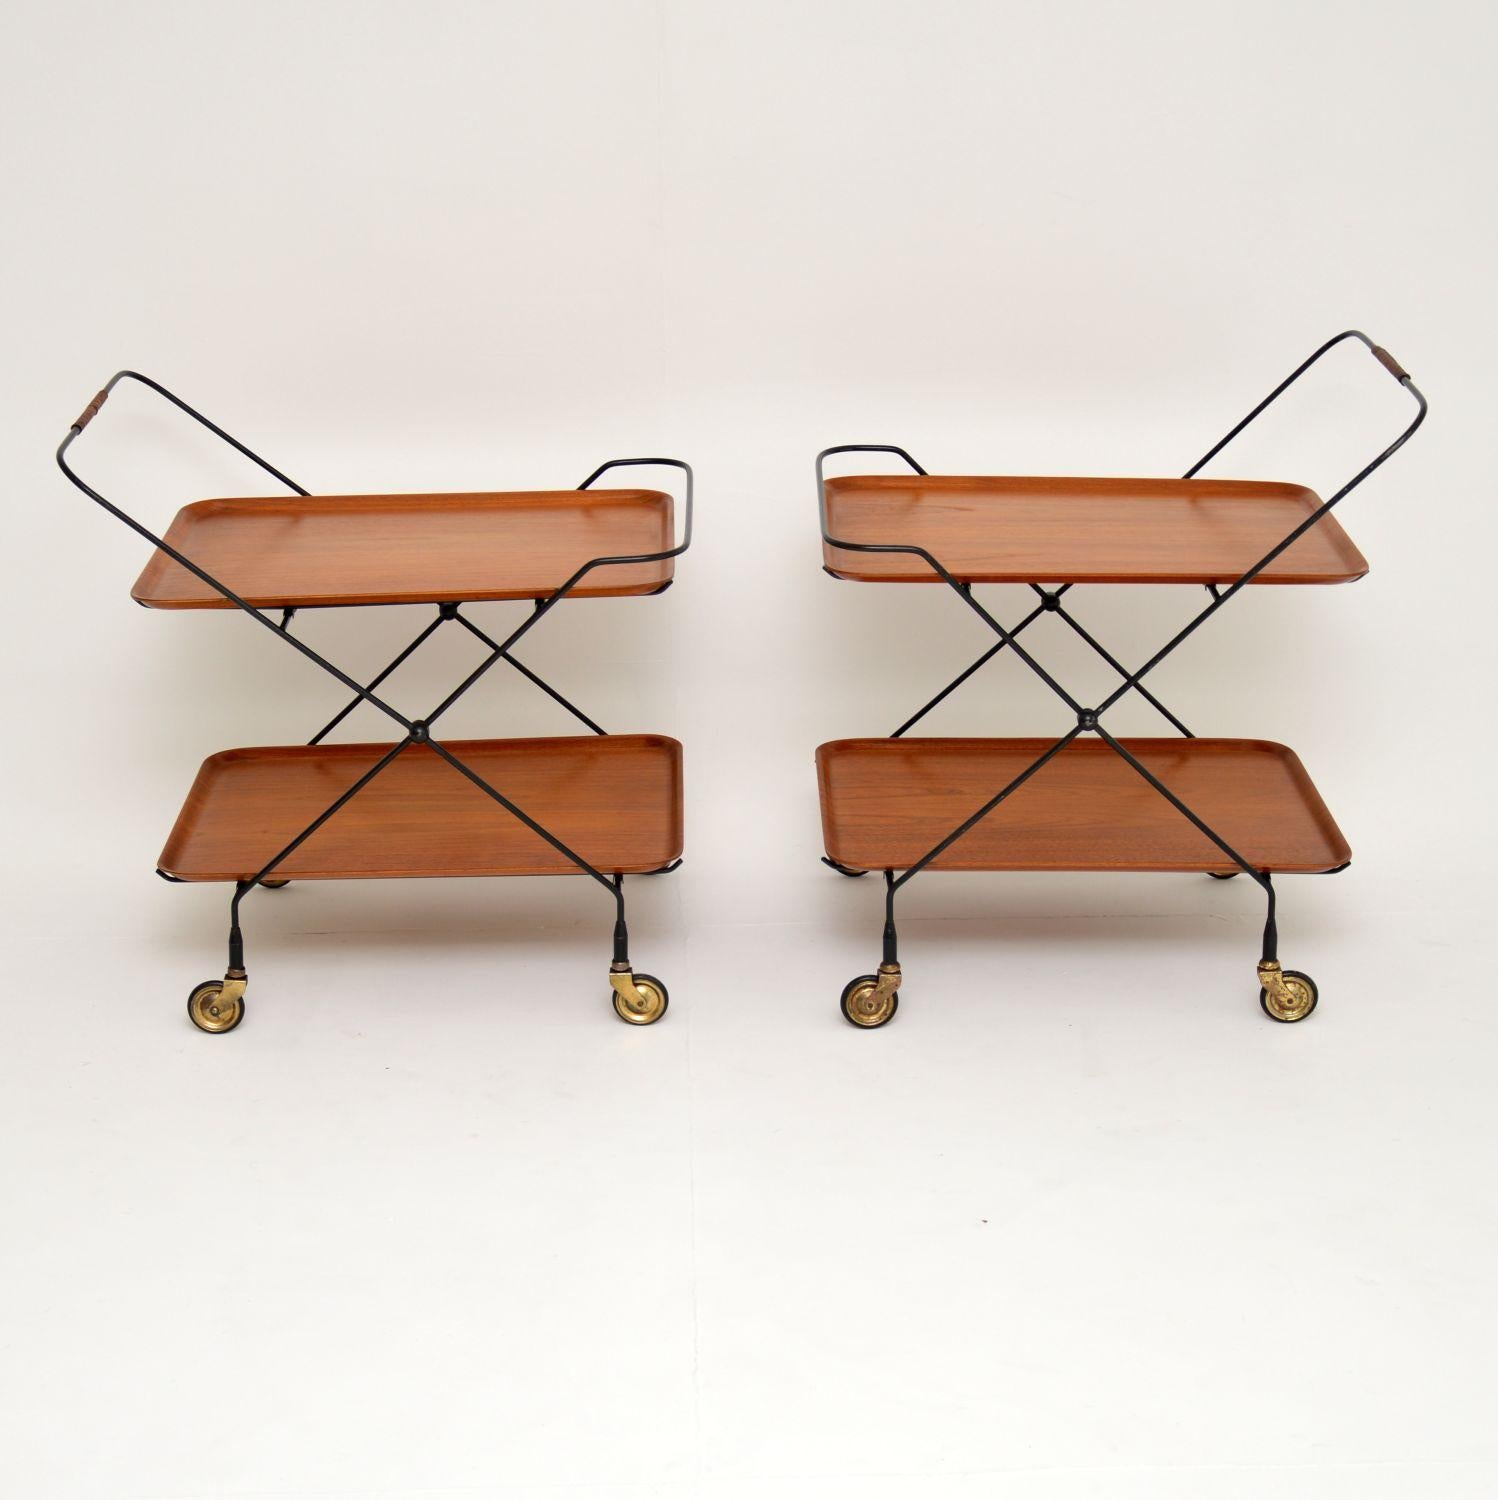 A stunning pair of vintage side tables or serving trolleys, these were made in Sweden and date from the 1960s. They have four loose trays in teak which can all be removed. The trays have all been stripped and re-polished, they are in superb